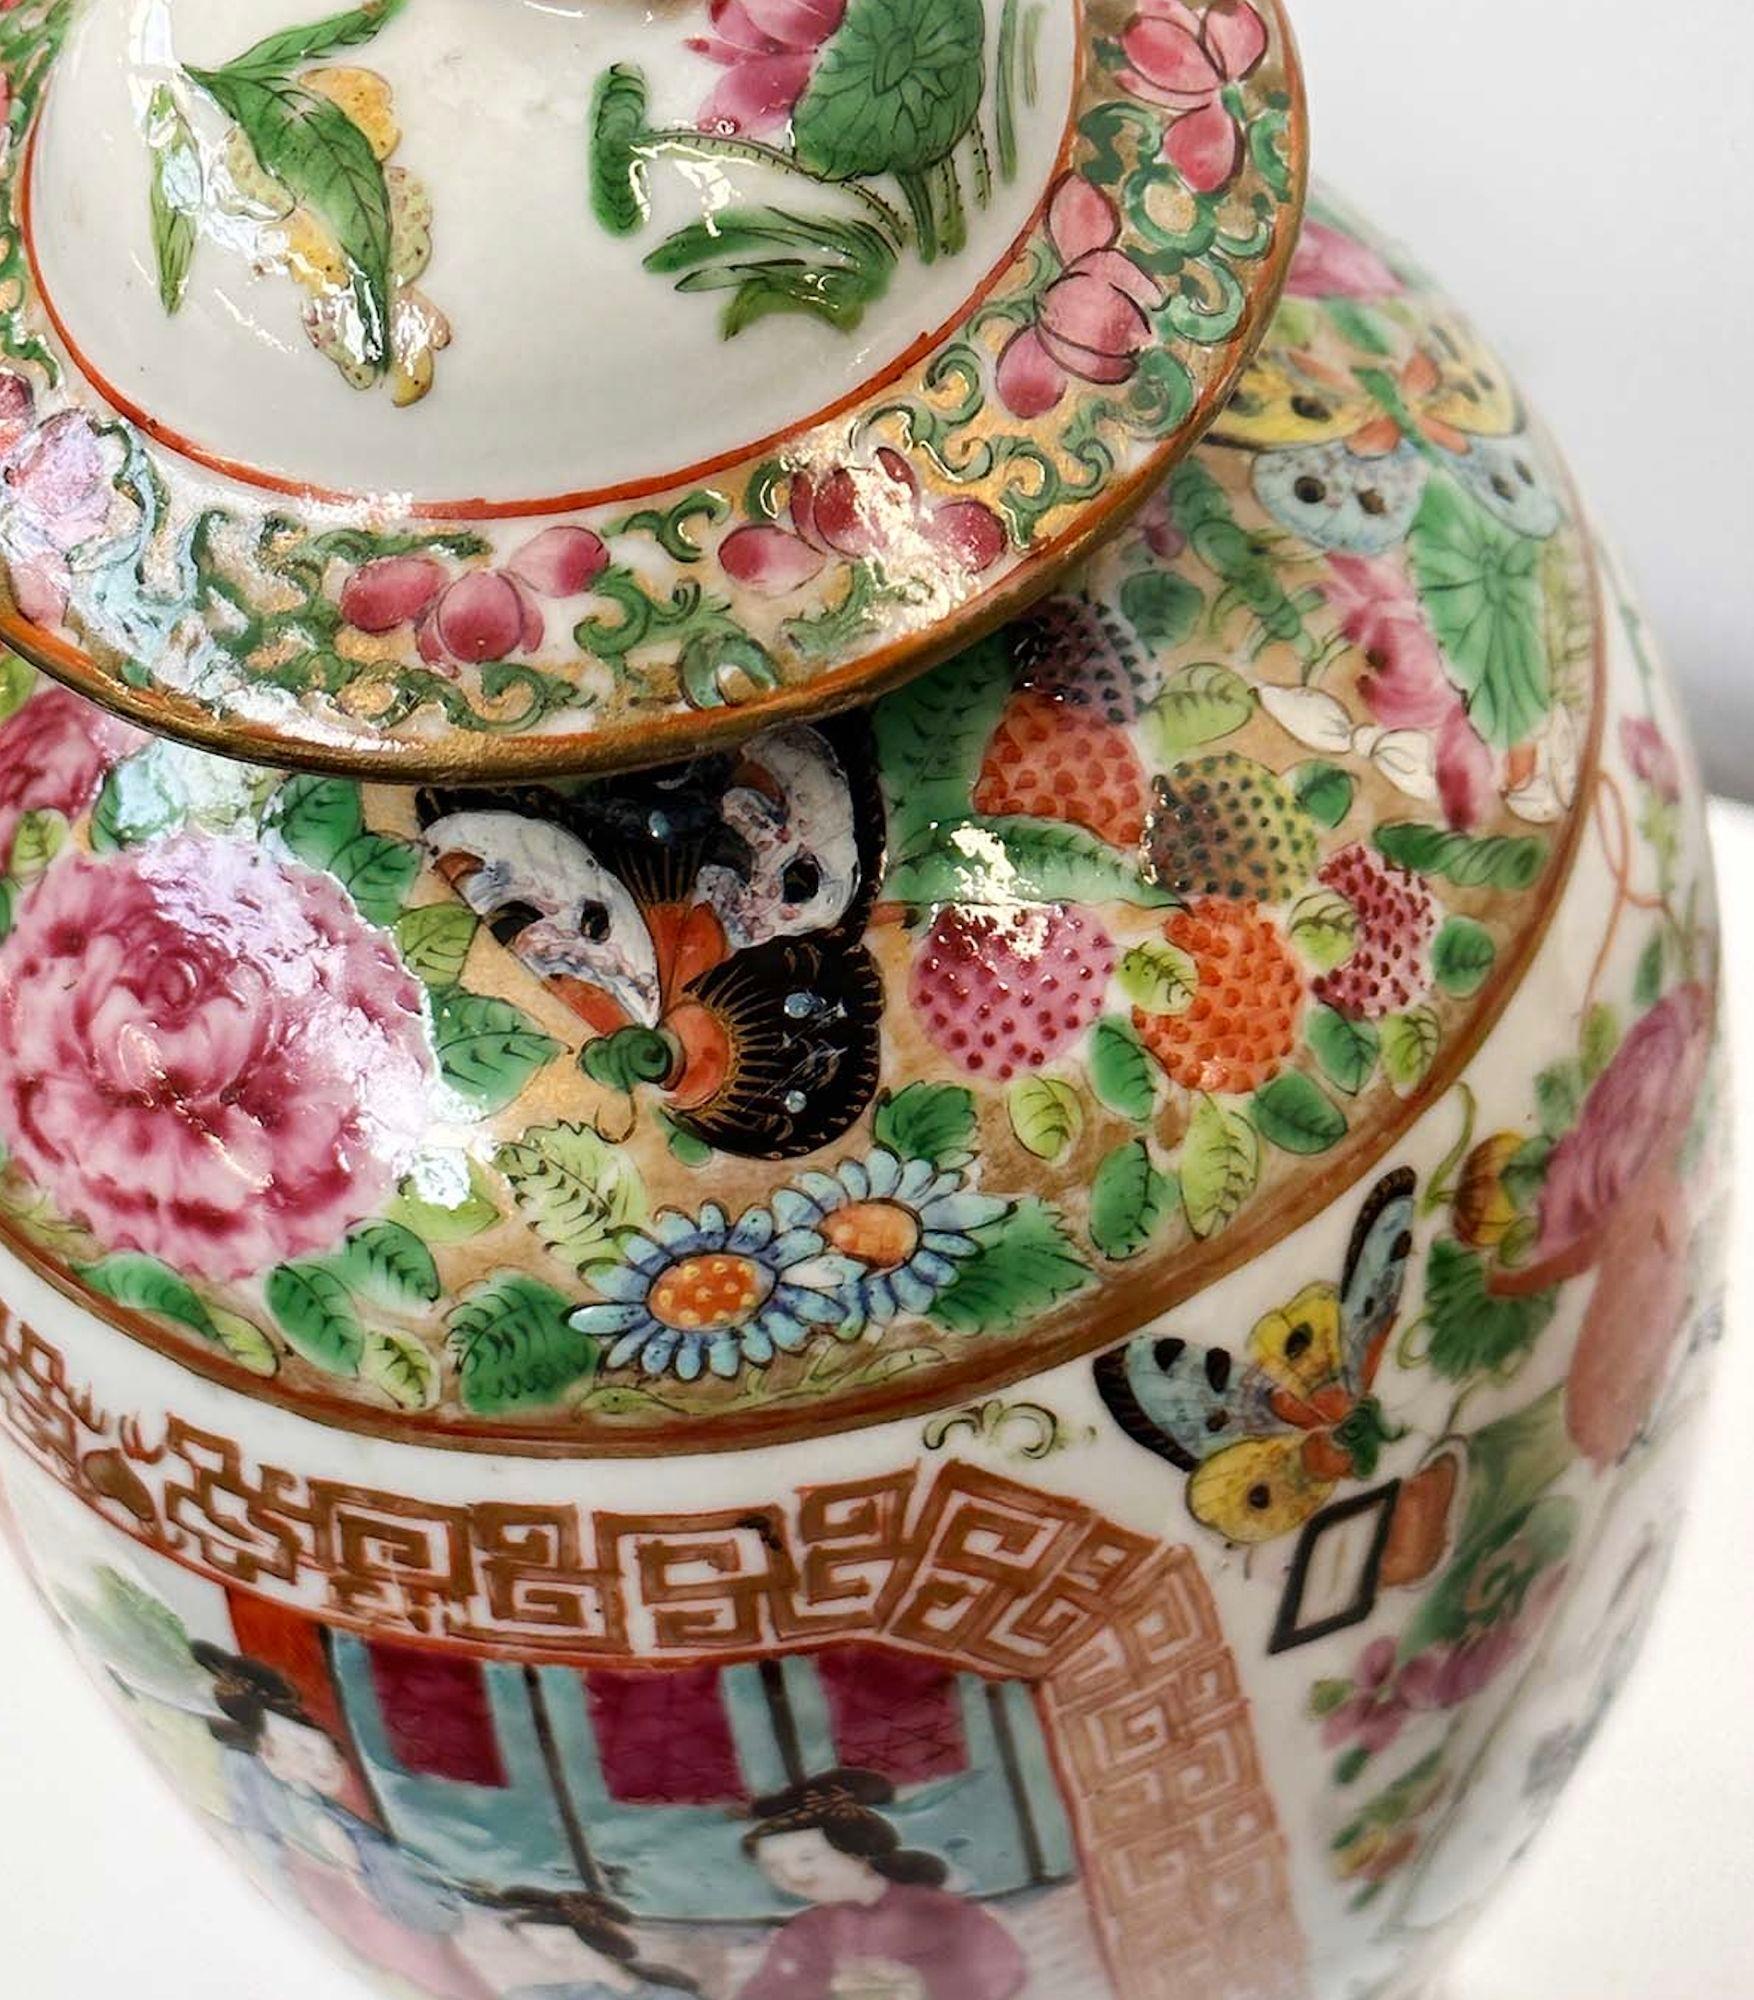 Pair of Chinese traditional Famille Rose Canton vases with great hand-painted details such as depictions of daily life, traditional Chinese scenes, botanical figures and butterflies. Each vase includes an ornate lid with a foo dog on top. Made in